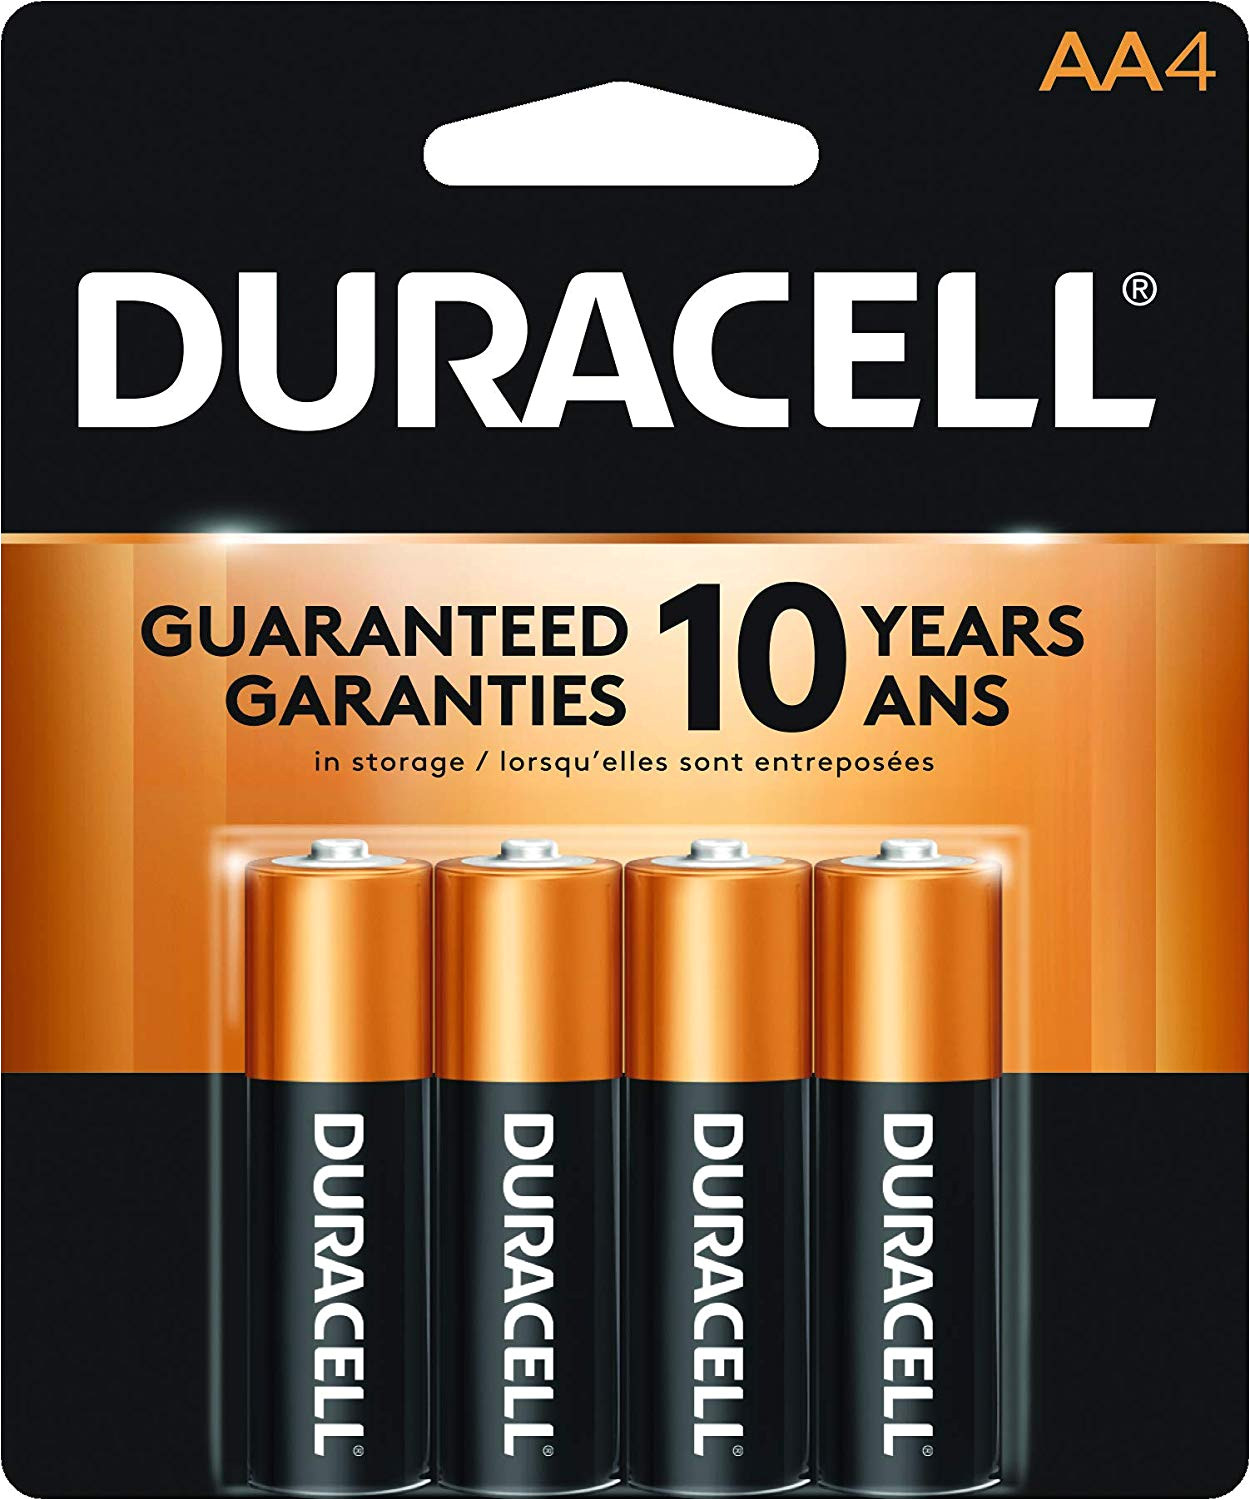 amazon com duracell coppertop aa alkaline batteries long lasting all purpose double a battery for household and business 4 count health personal